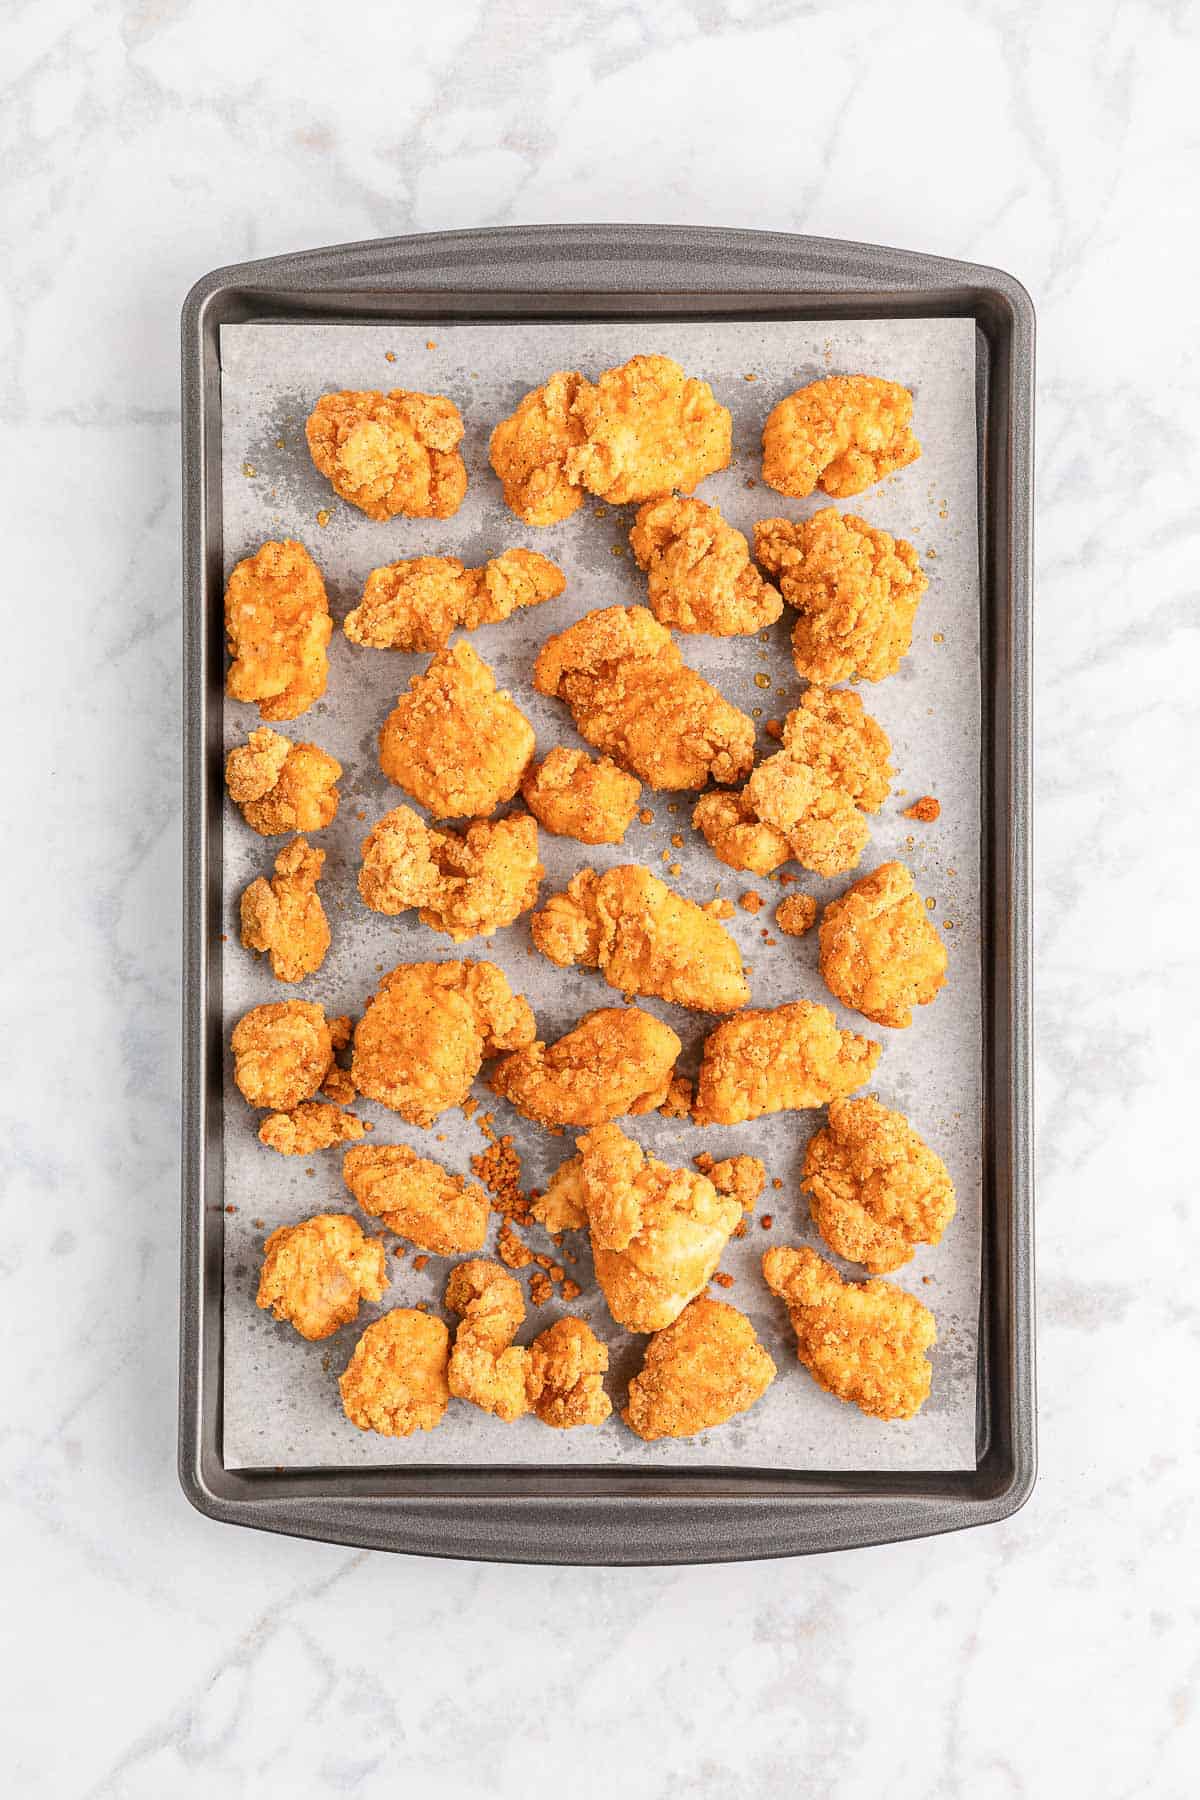 Cooked popcorn chicken on a baking tray.